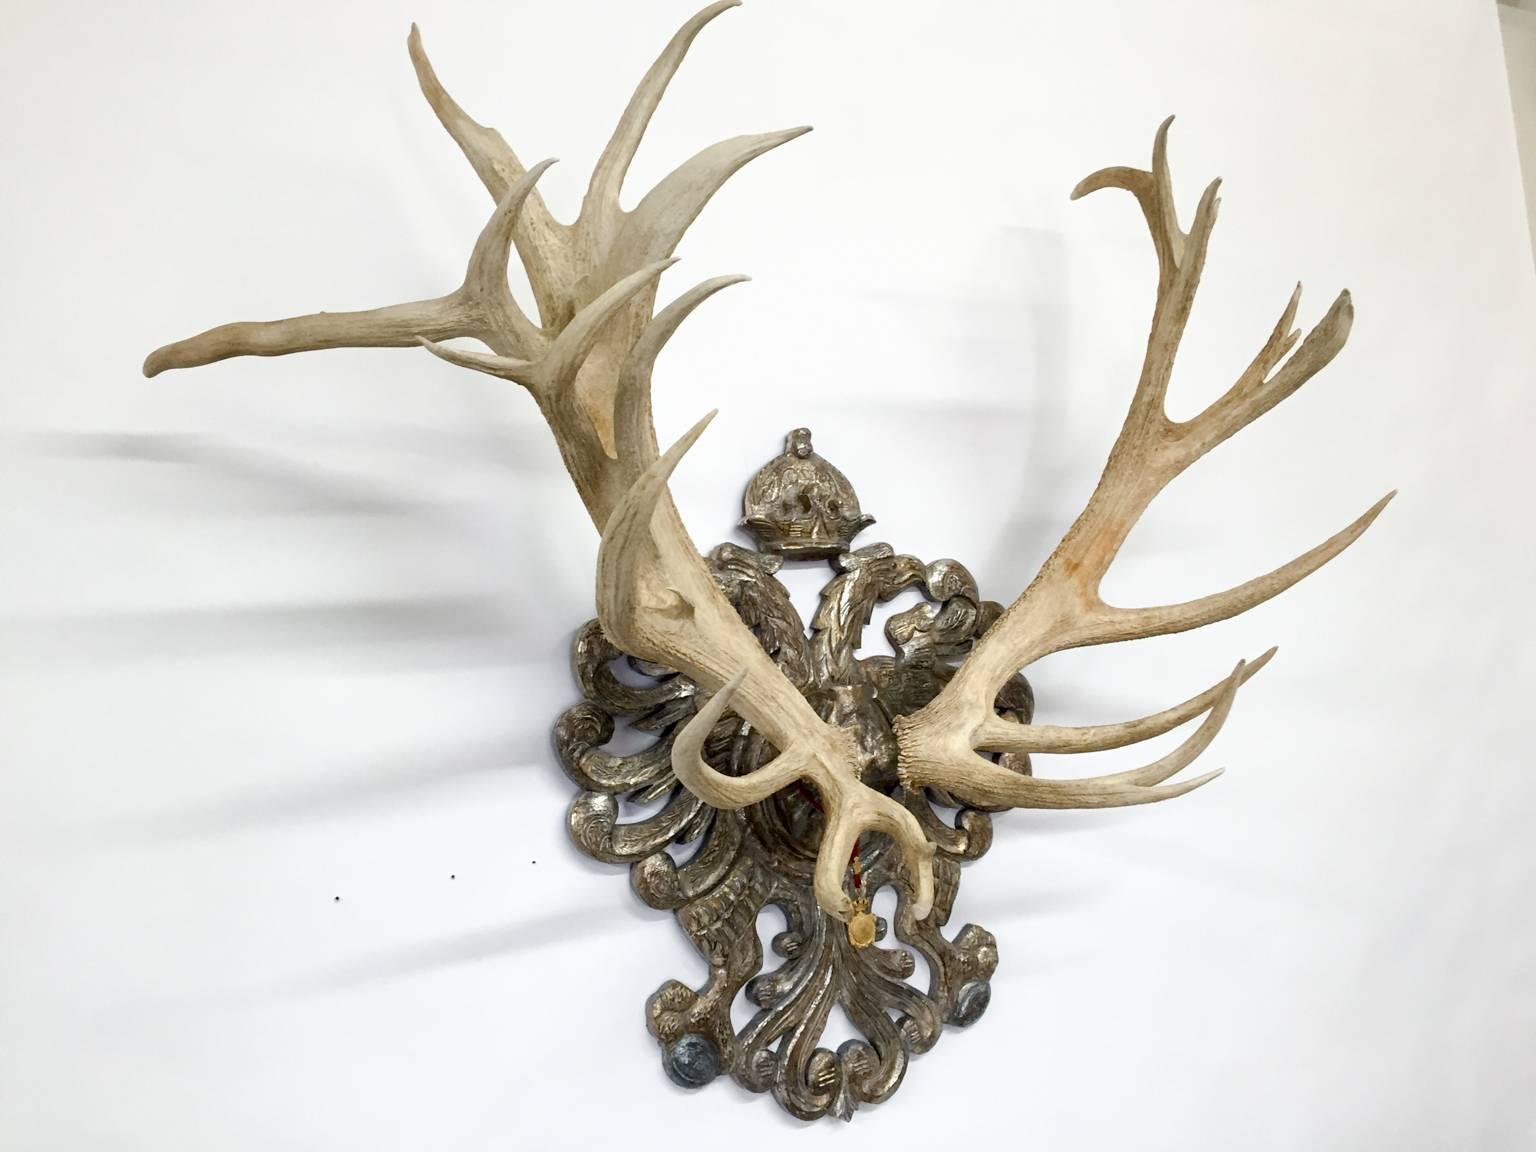 19th century red stag from Emperor Franz Joseph's castle at Eckartsau in the Southern Austrian Alps, a favorite hunting schloss of the Habsburg Royal family. This historic hunting trophy features a hand carved 19th century plaque with polychrome